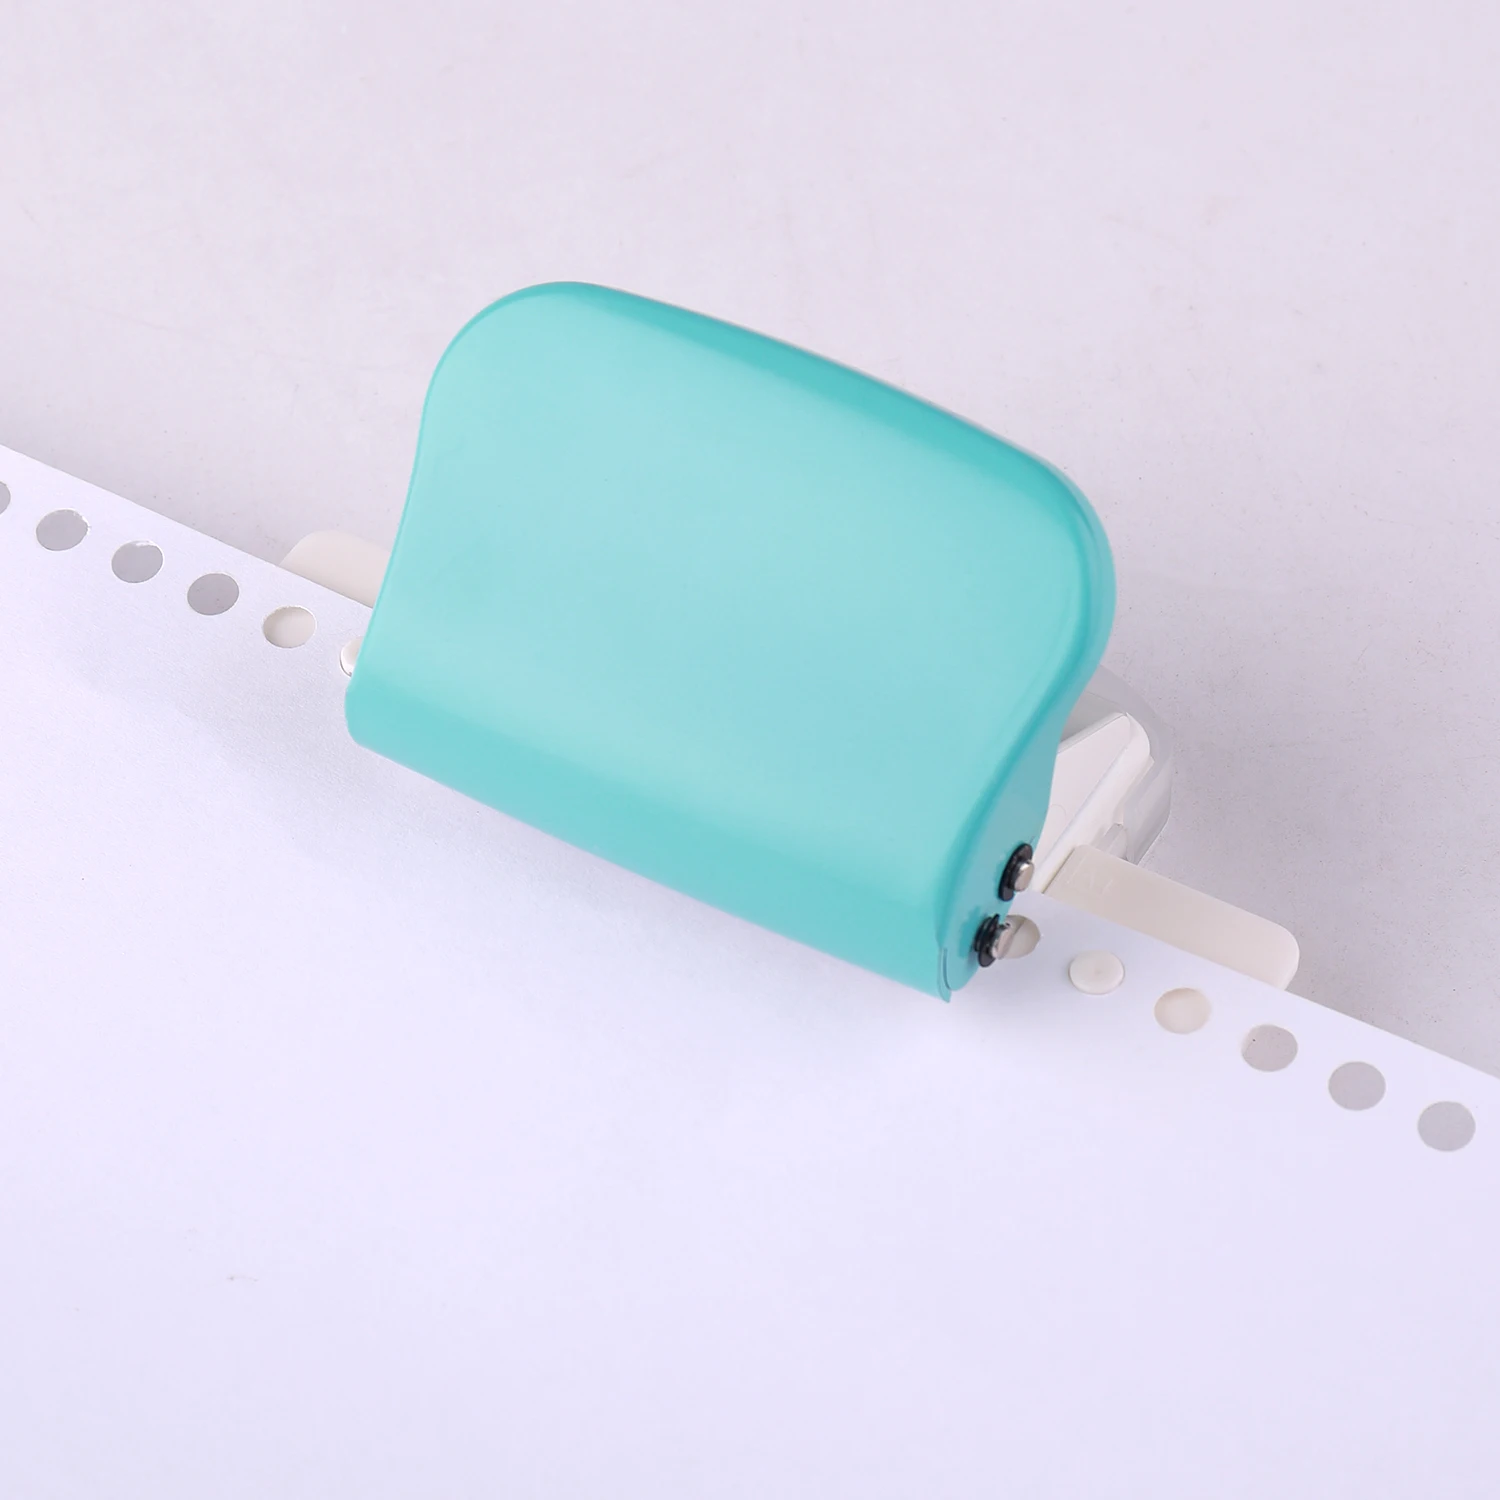 Decoe 6-Hole Paper Punch Handheld Metal Hole Puncher 5 Sheet Capacity 6mm for A4 A5 B5 Notebook Scrapbook Diary Planner 